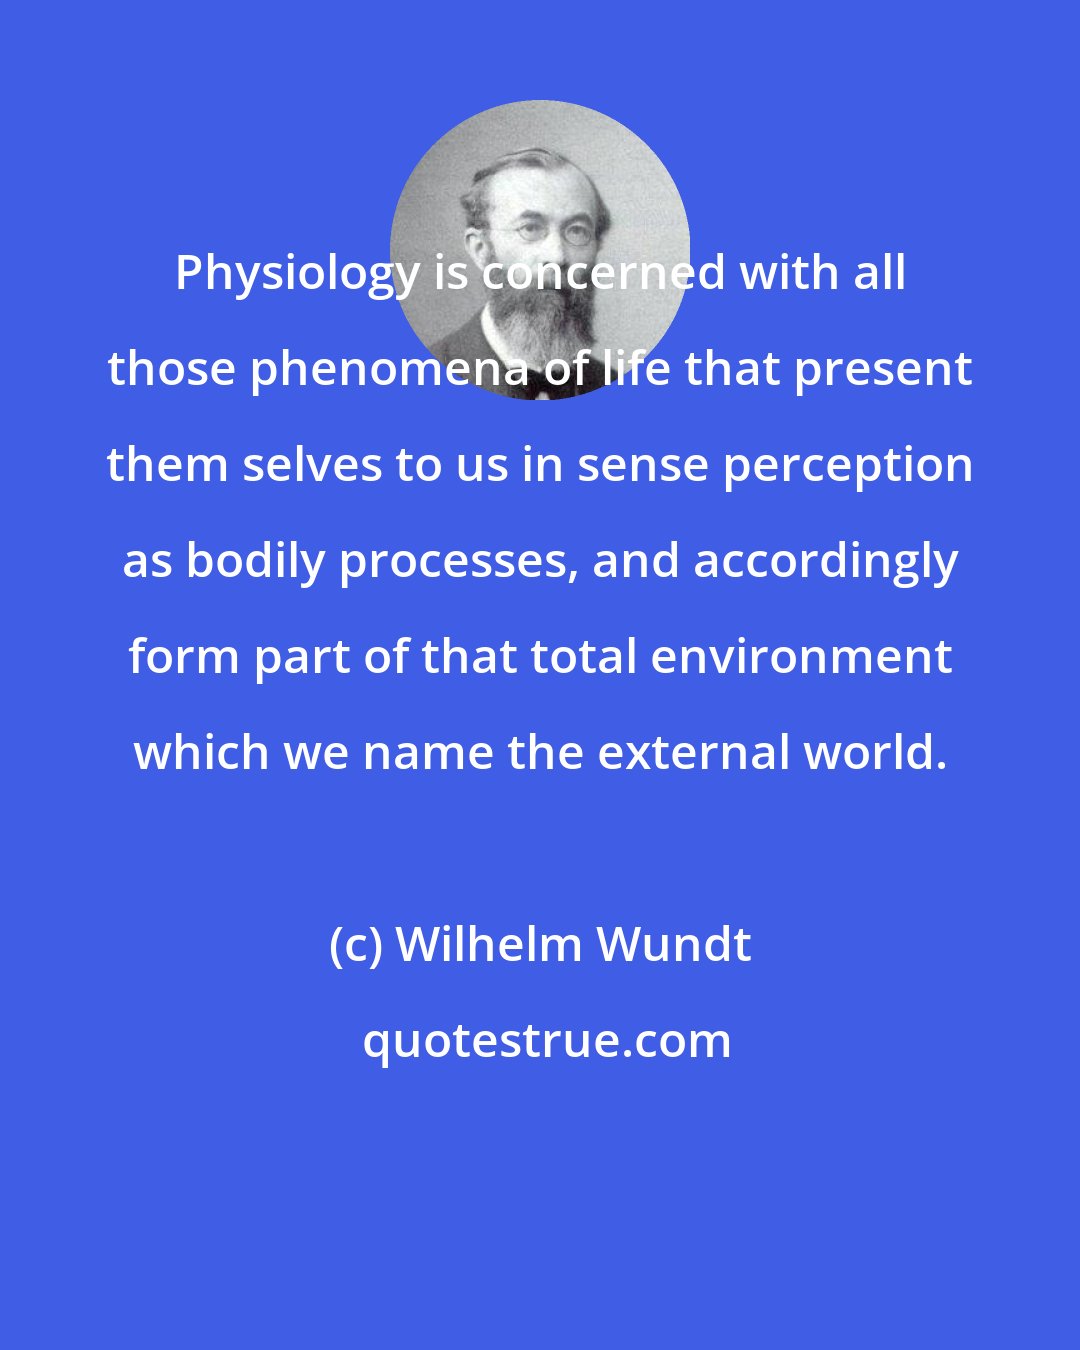 Wilhelm Wundt: Physiology is concerned with all those phenomena of life that present them selves to us in sense perception as bodily processes, and accordingly form part of that total environment which we name the external world.